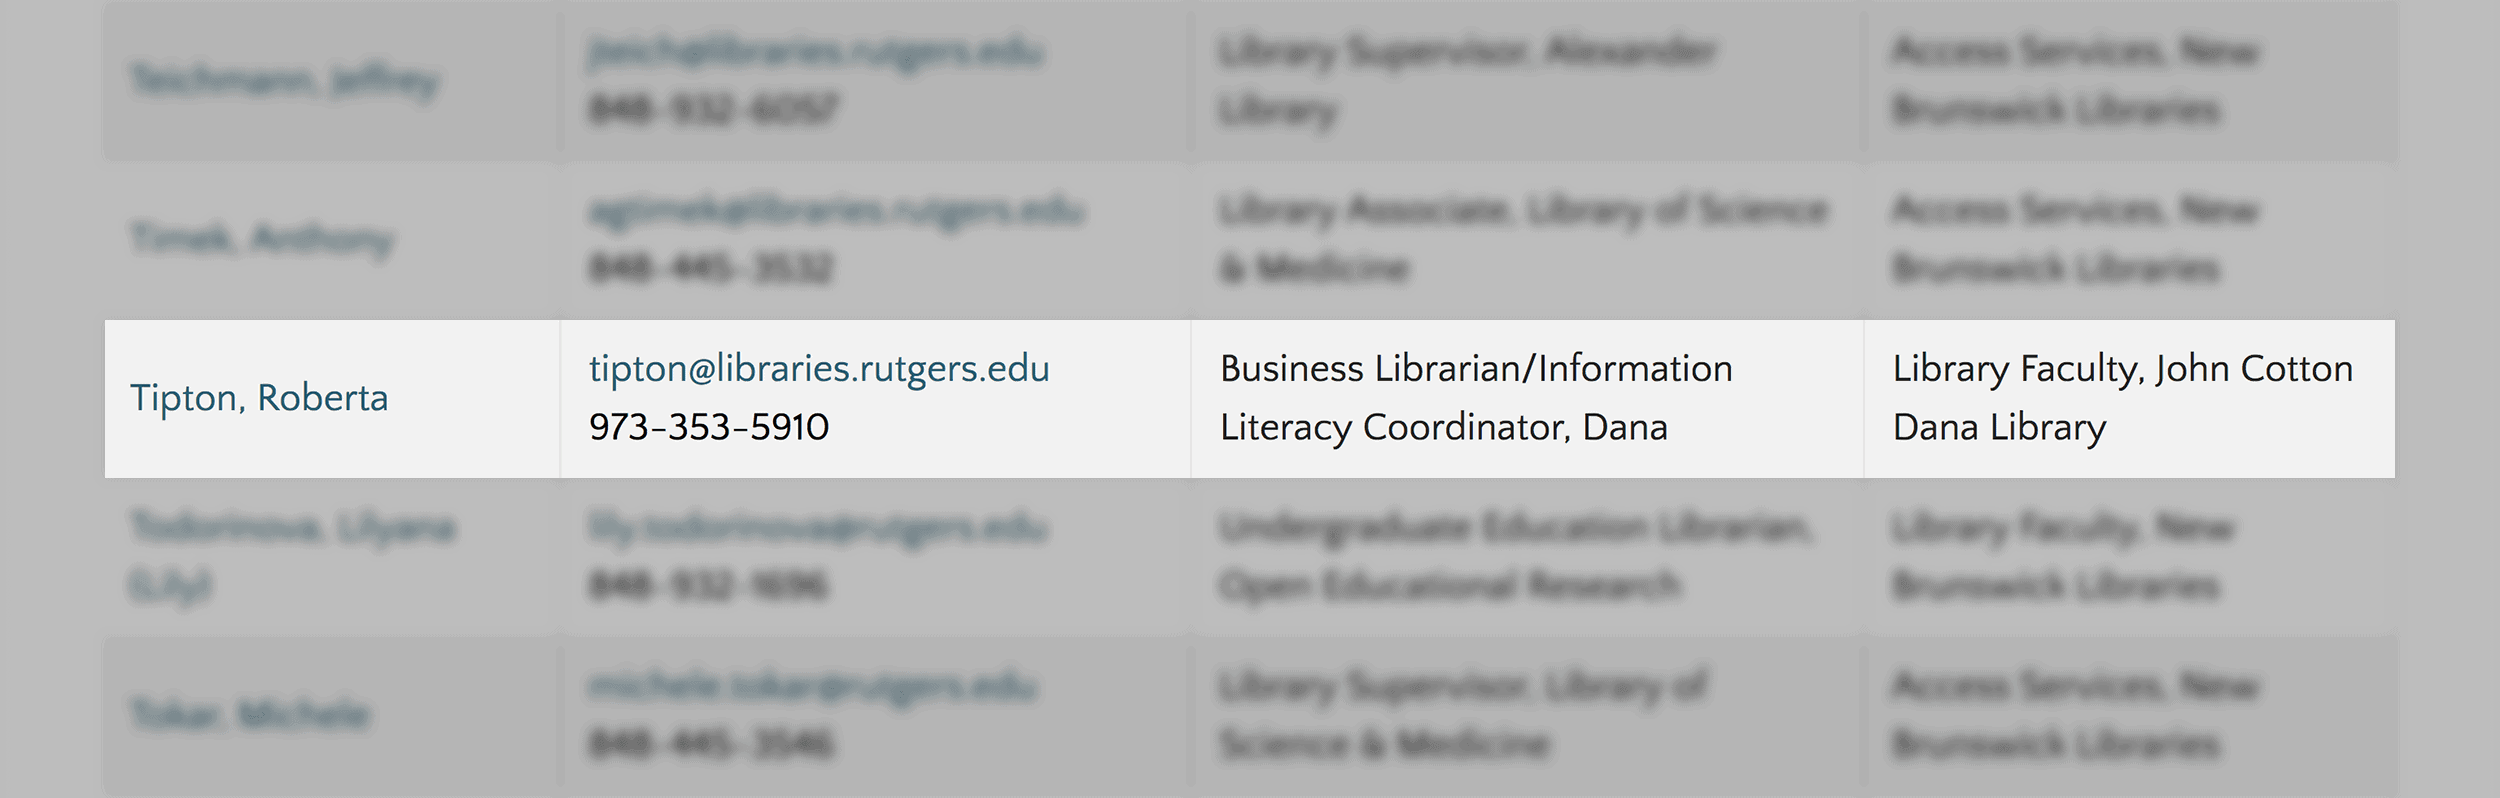 Business librarian